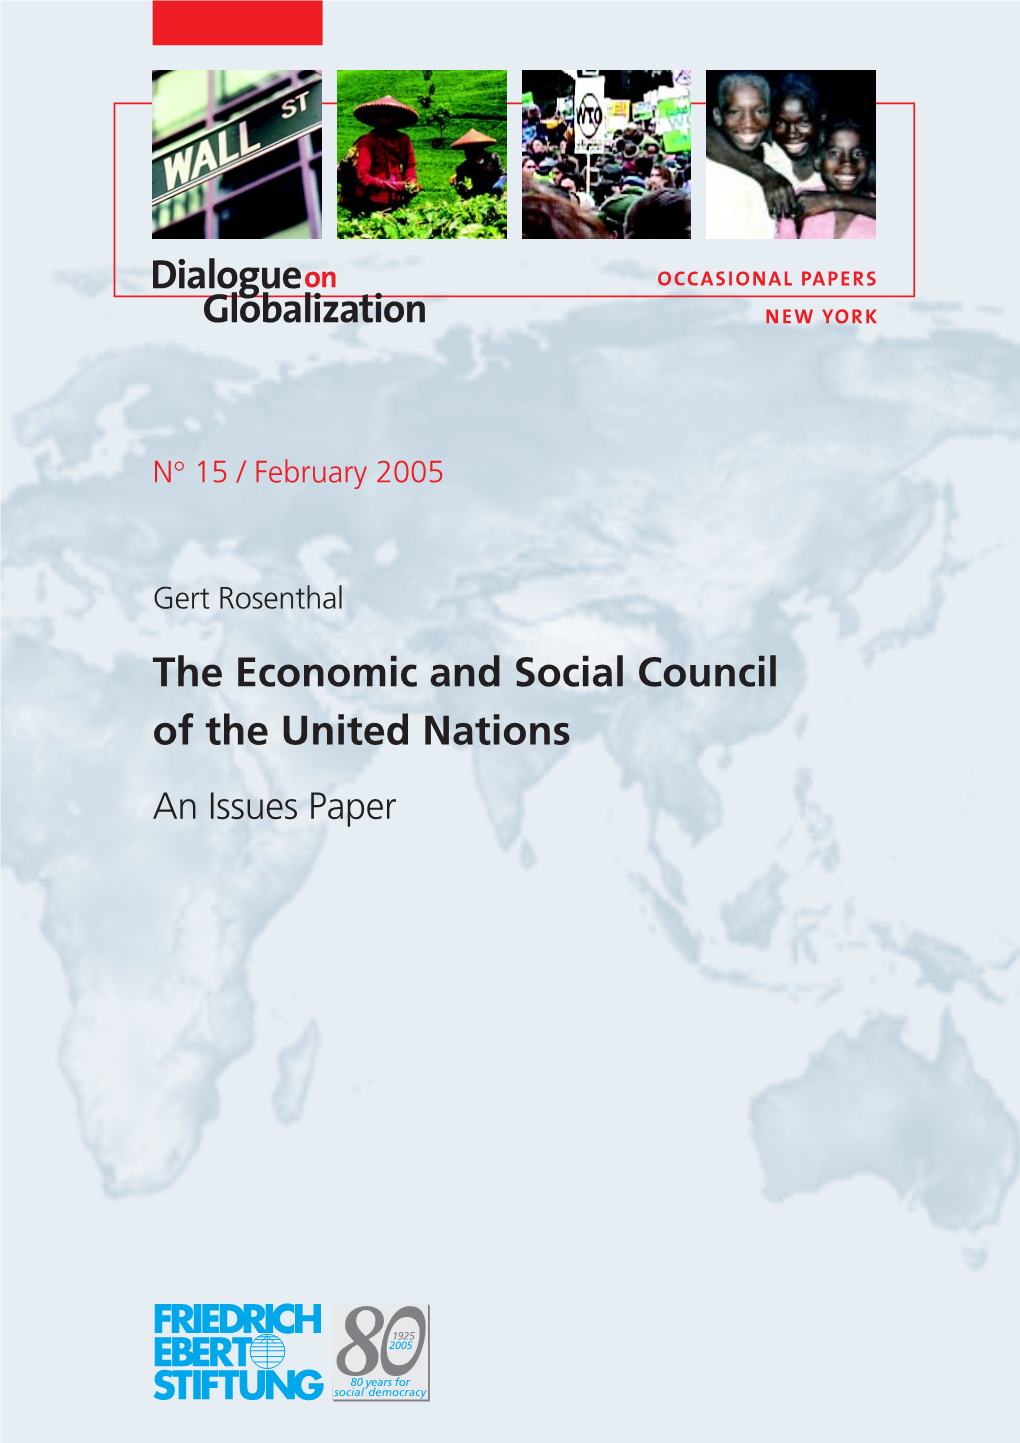 The Economic and Social Council of the United Nations an Issues Paper